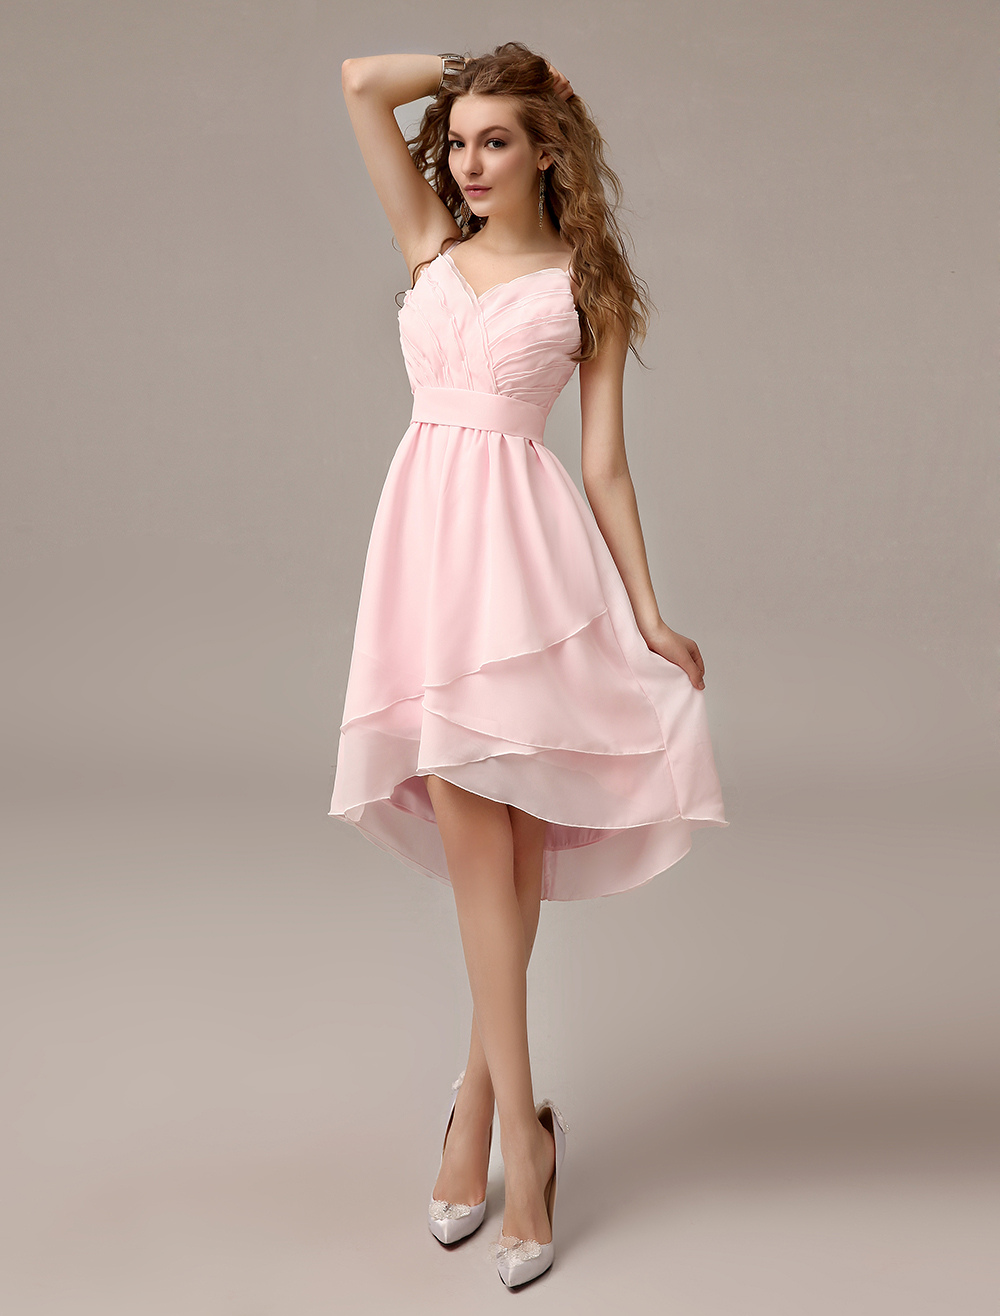 Asymmetrical Blush Pink A Line Ruched Chiffon Bridesmaid Dress With Straps Neck 9177